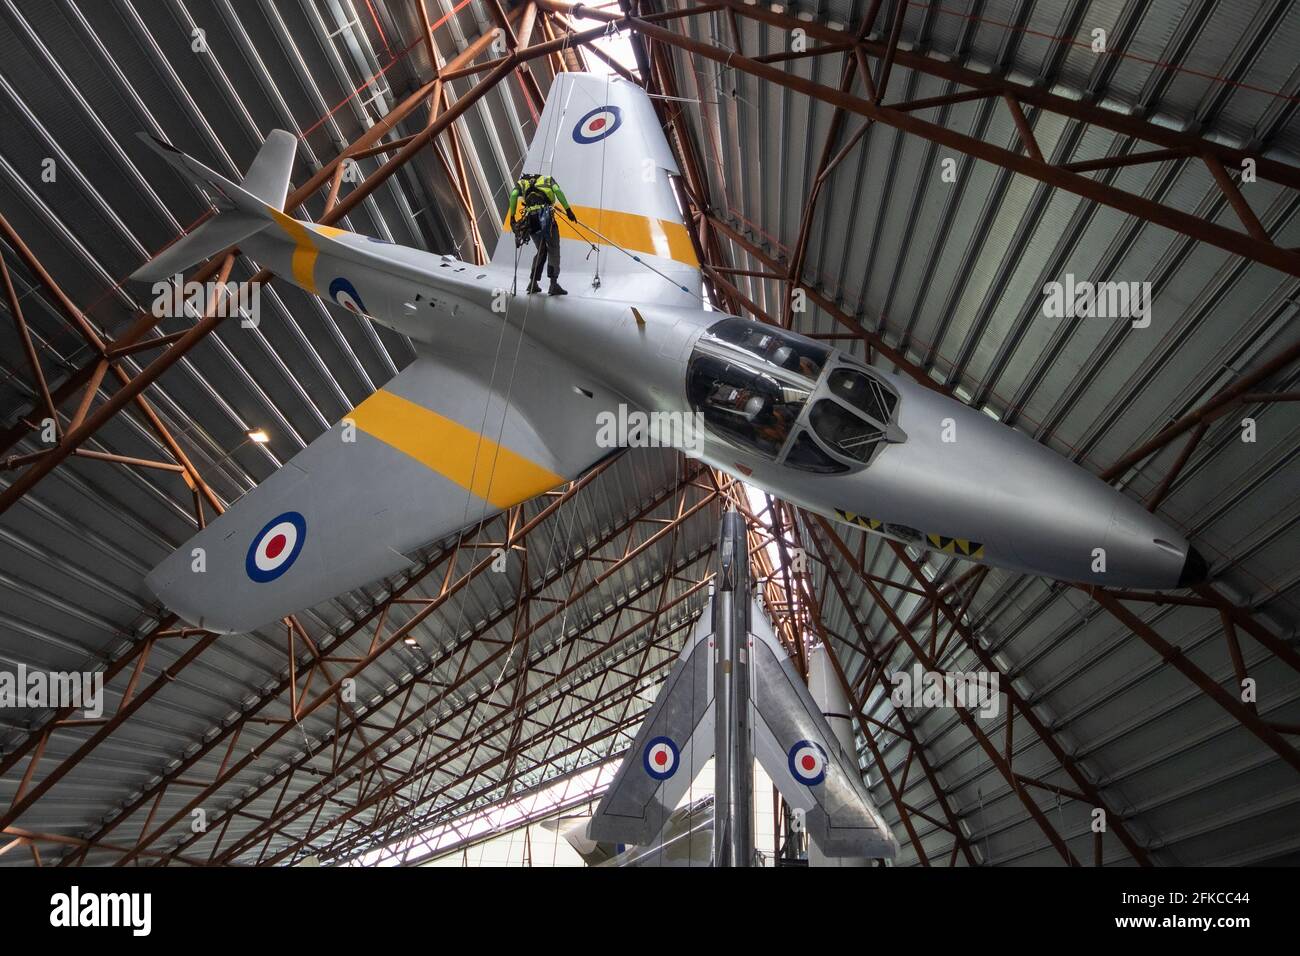 Cosford, United Kingdom, 30th April 2021. RAF Museum Cosford's National Cold War Exhibition hangar features a number of suspended and large aircraft, some of which are over a 100ft in the air. With limited or difficult access for museum staff, an annual clean of the larger and suspended aircraft along with inspection of the suspension cables is undertaken by a specialist team using a combination of both rope access and mechanical platforms. Credit: Paul Bunch/Alamy Live News Stock Photo